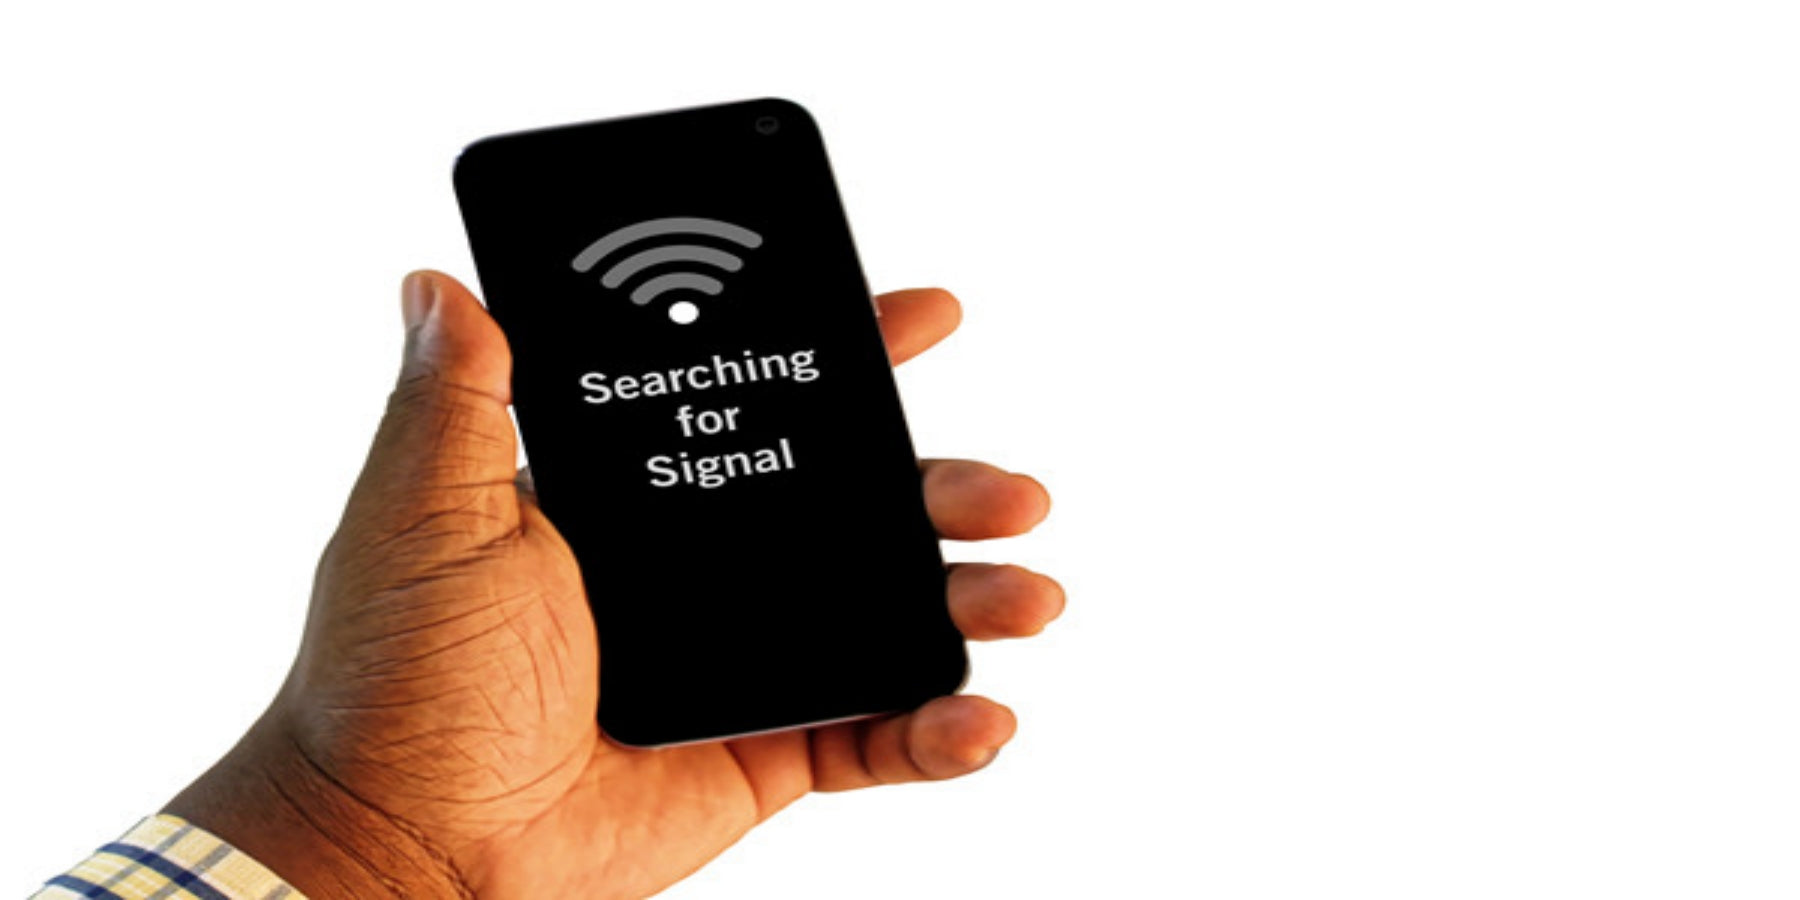 How to Get Cell Phone Service in a Dead Zone